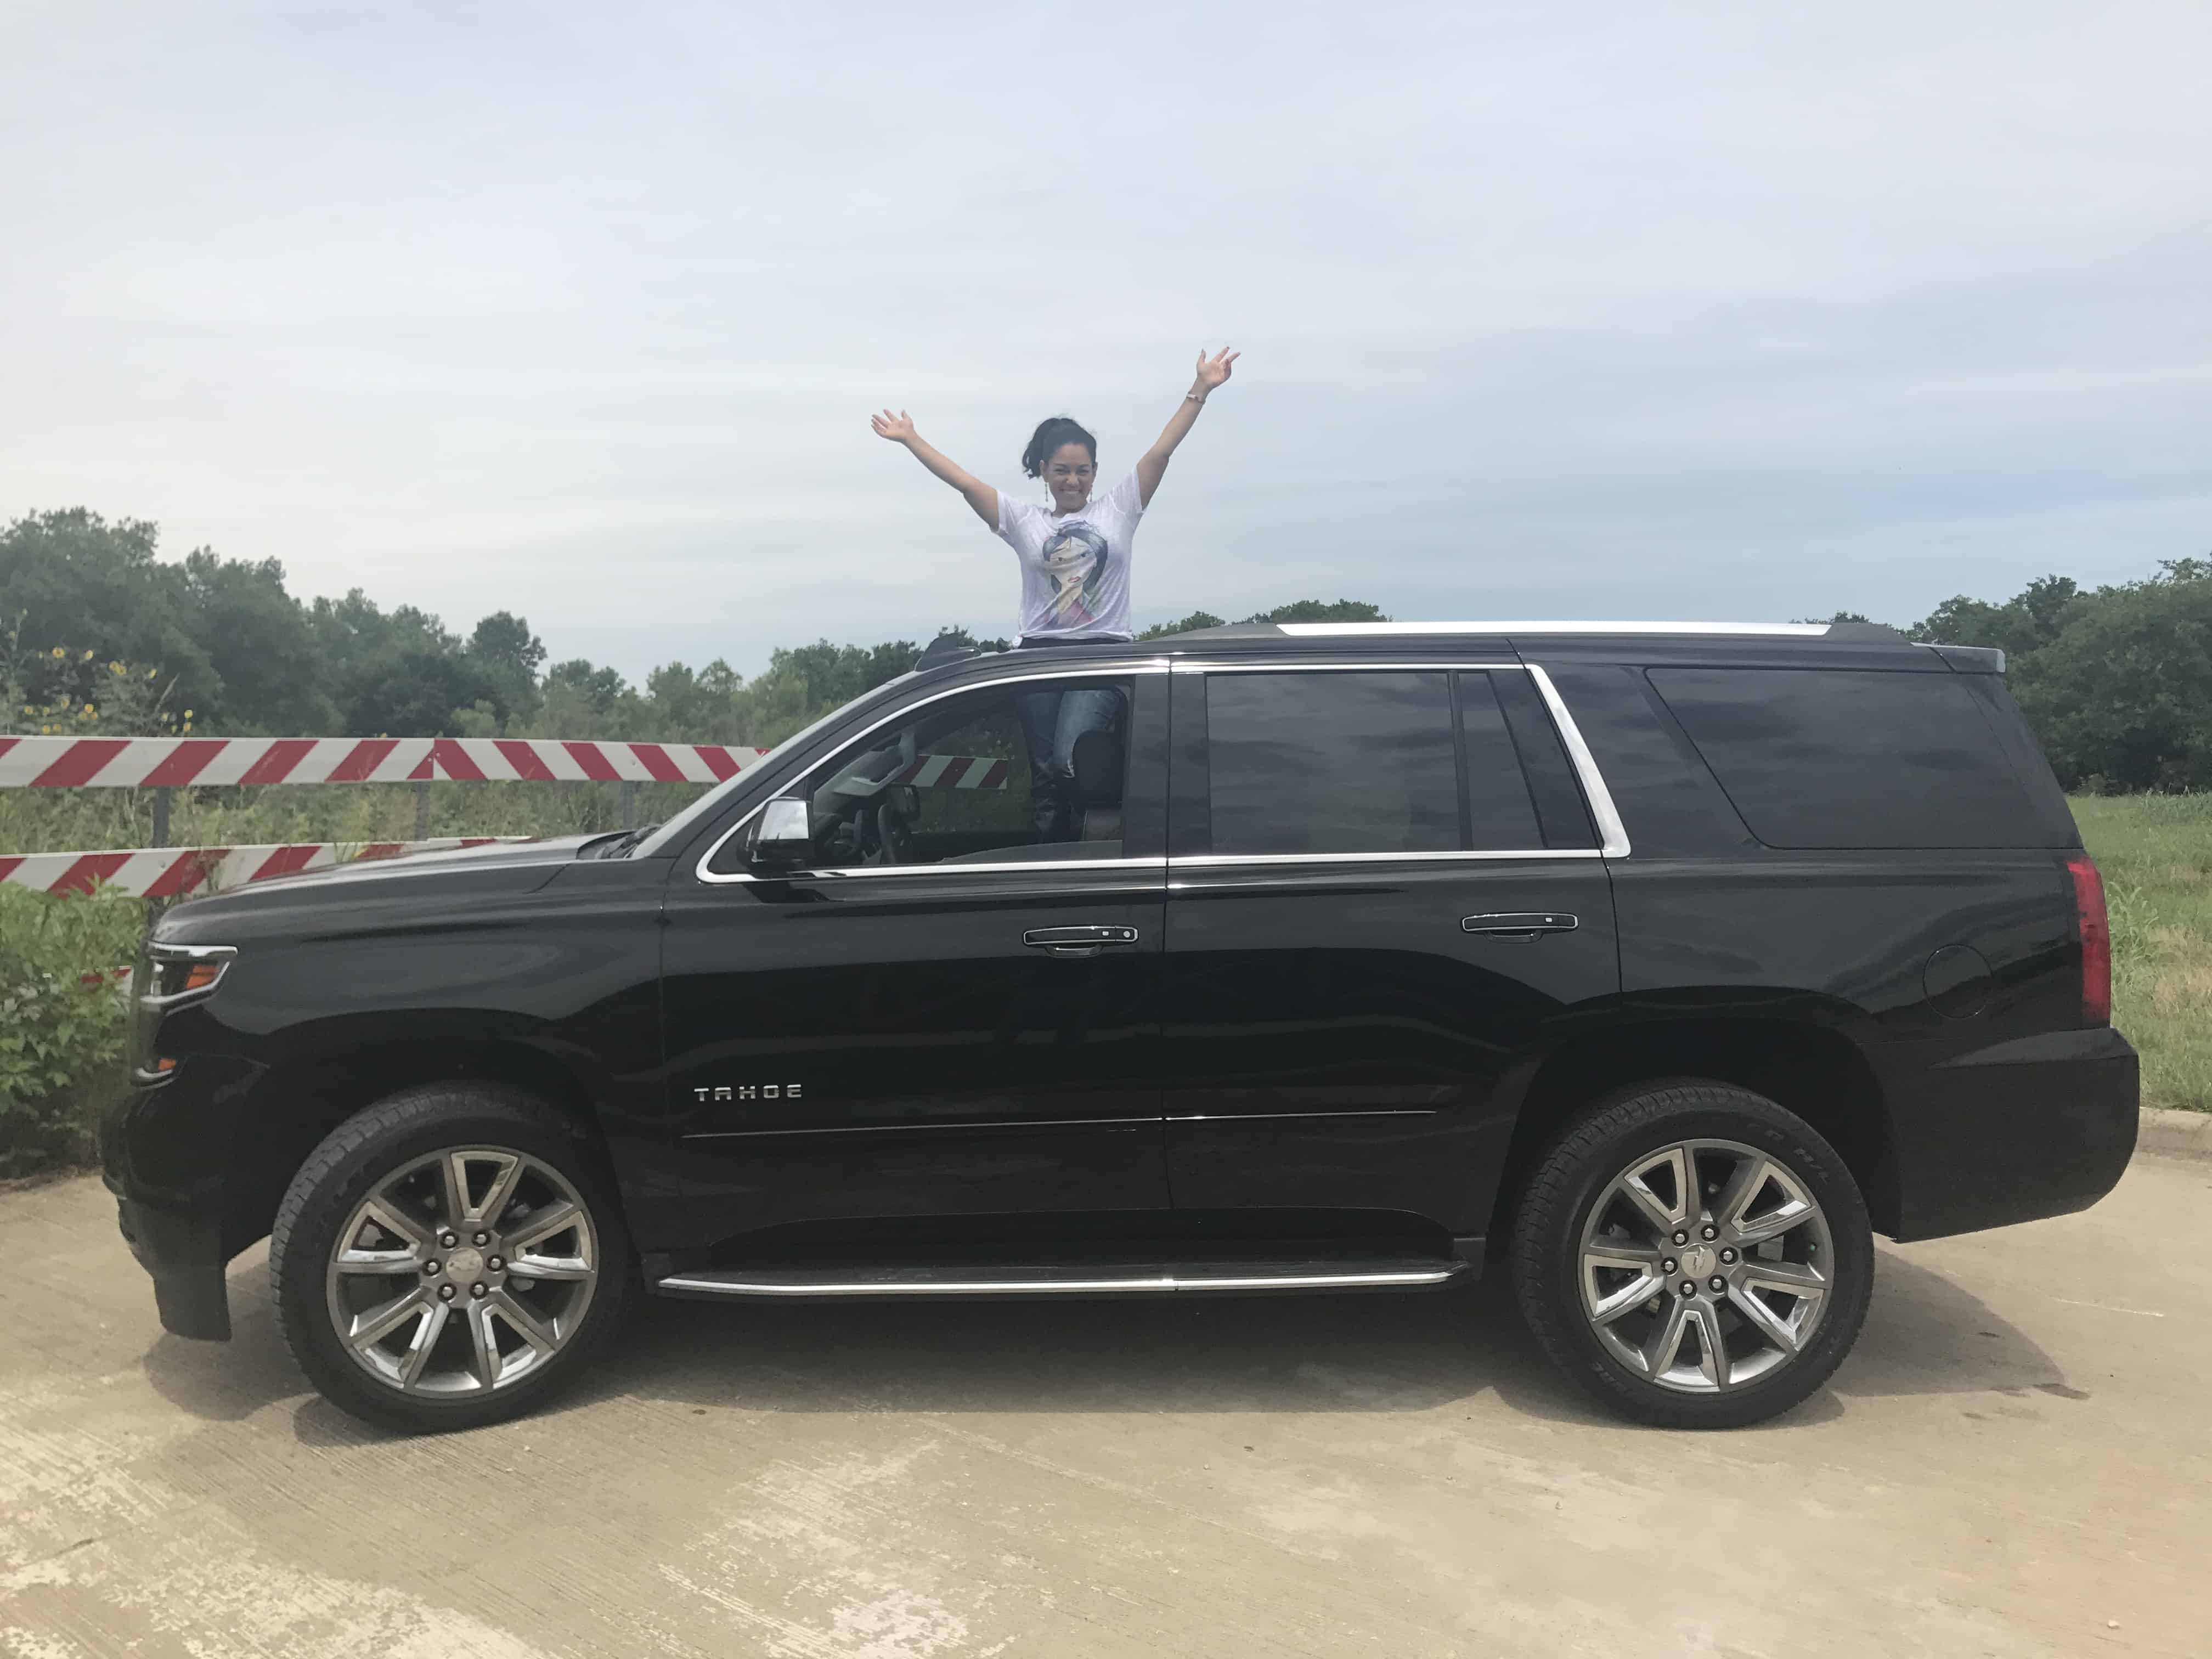 Texas influencer Elayna Fernandez ~ The Positive MOM & Chevy Tahoe - equipped for the road